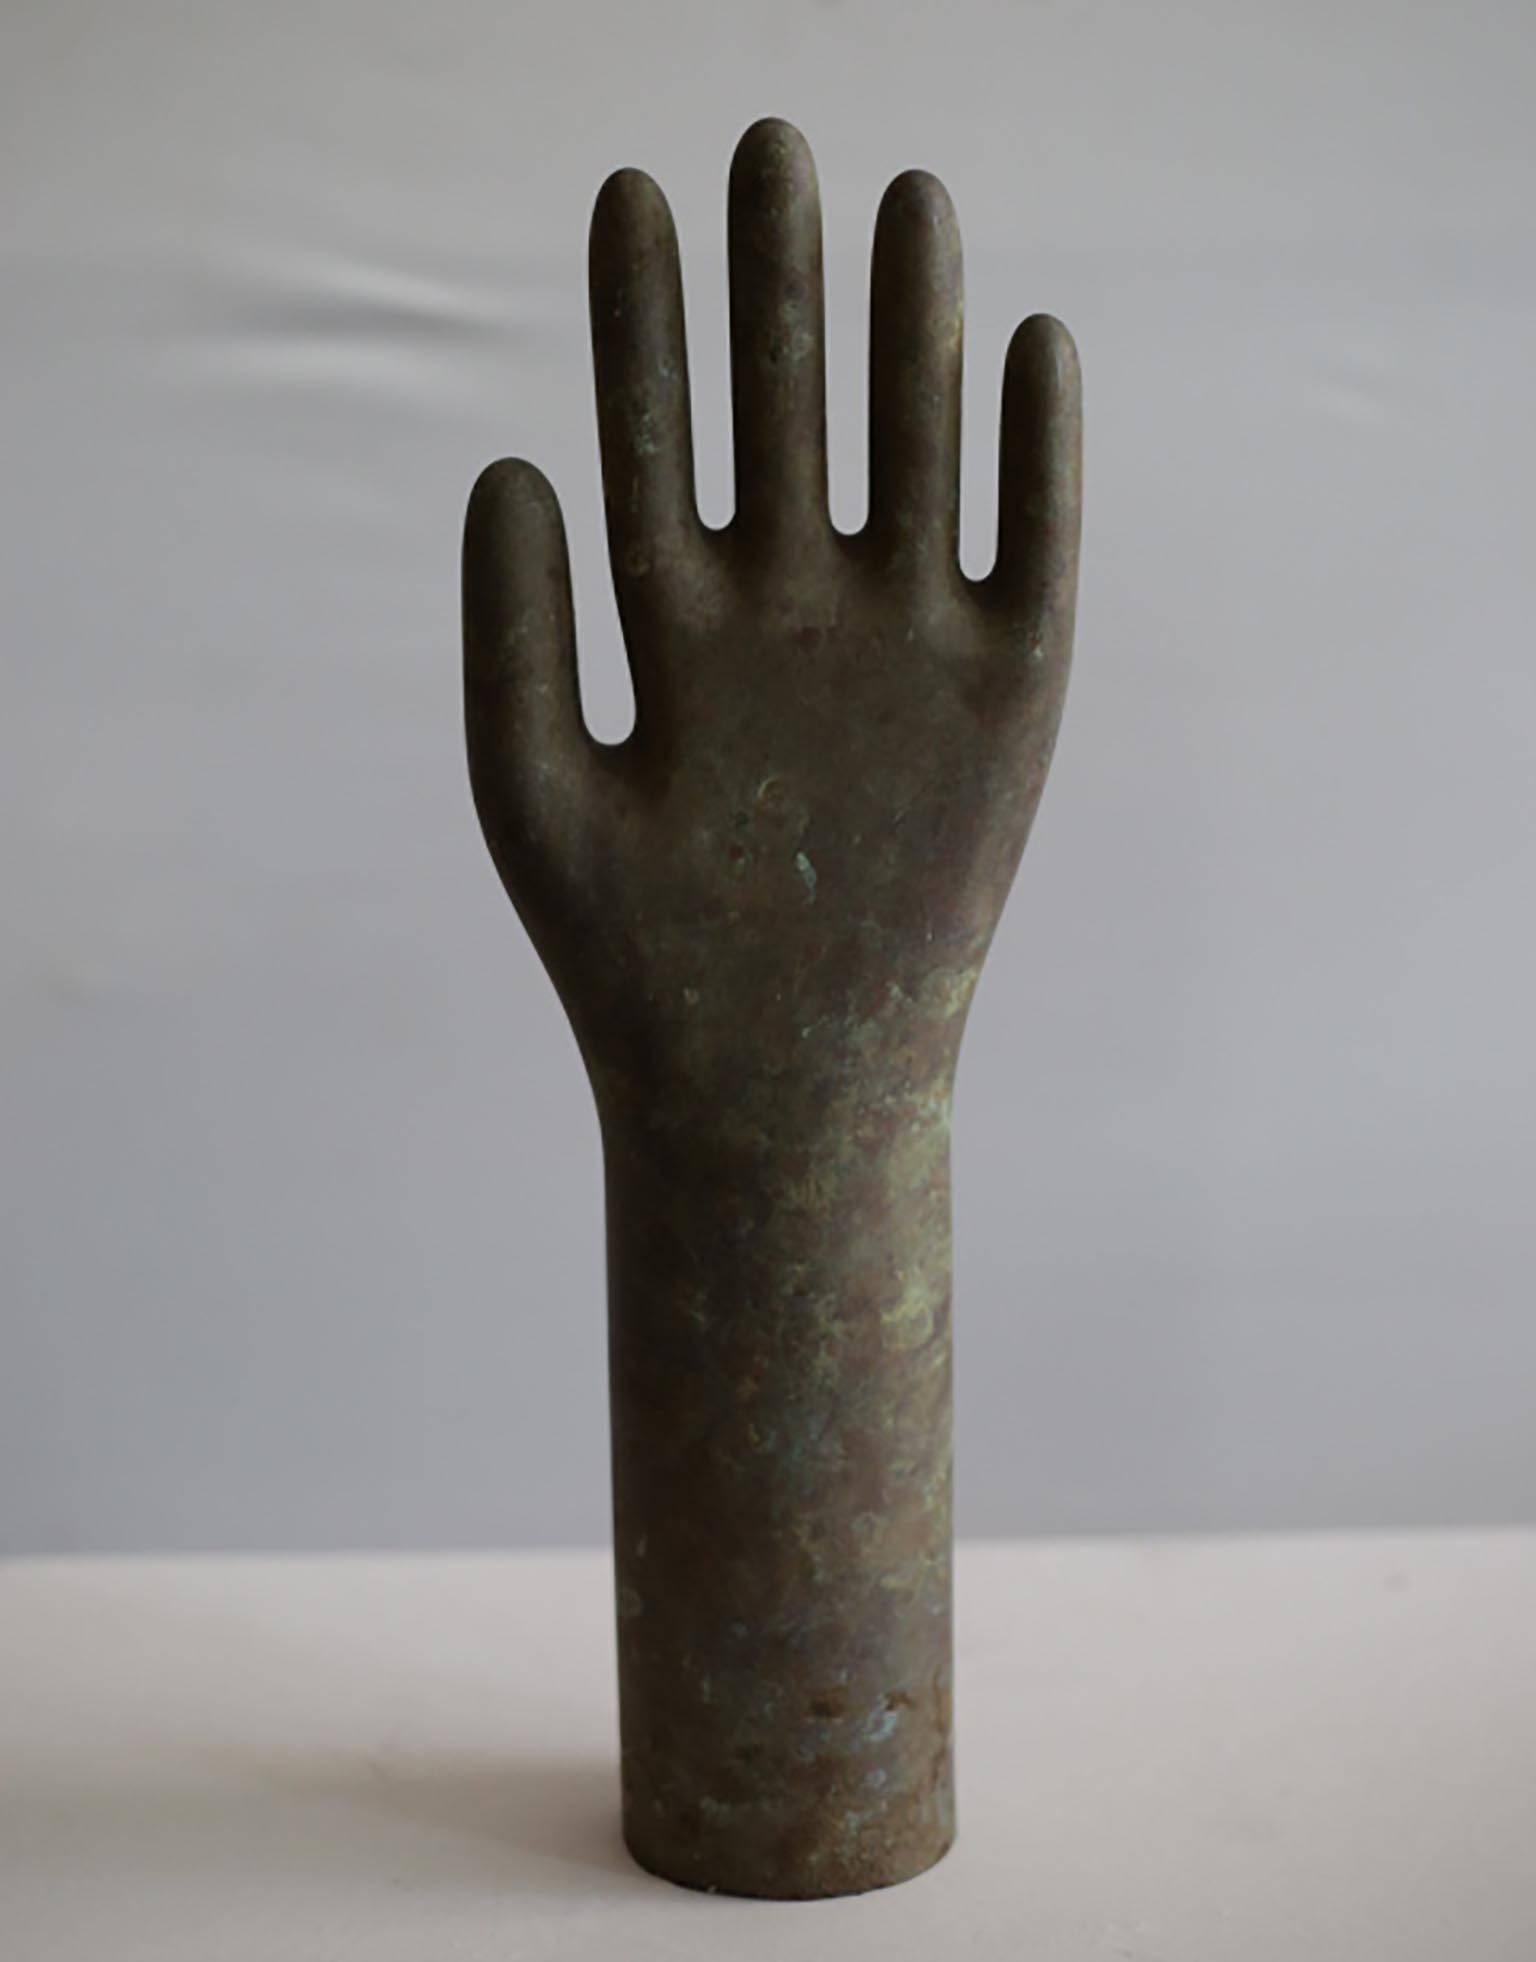 Aluminium glove mold, circa 1940-1950s, stands up on it's own. Great to accessorize a shelf or coffee table. Mount it on a metal stand or hang it on a wall perpendicularly. Could also be used a towel or coat holder.